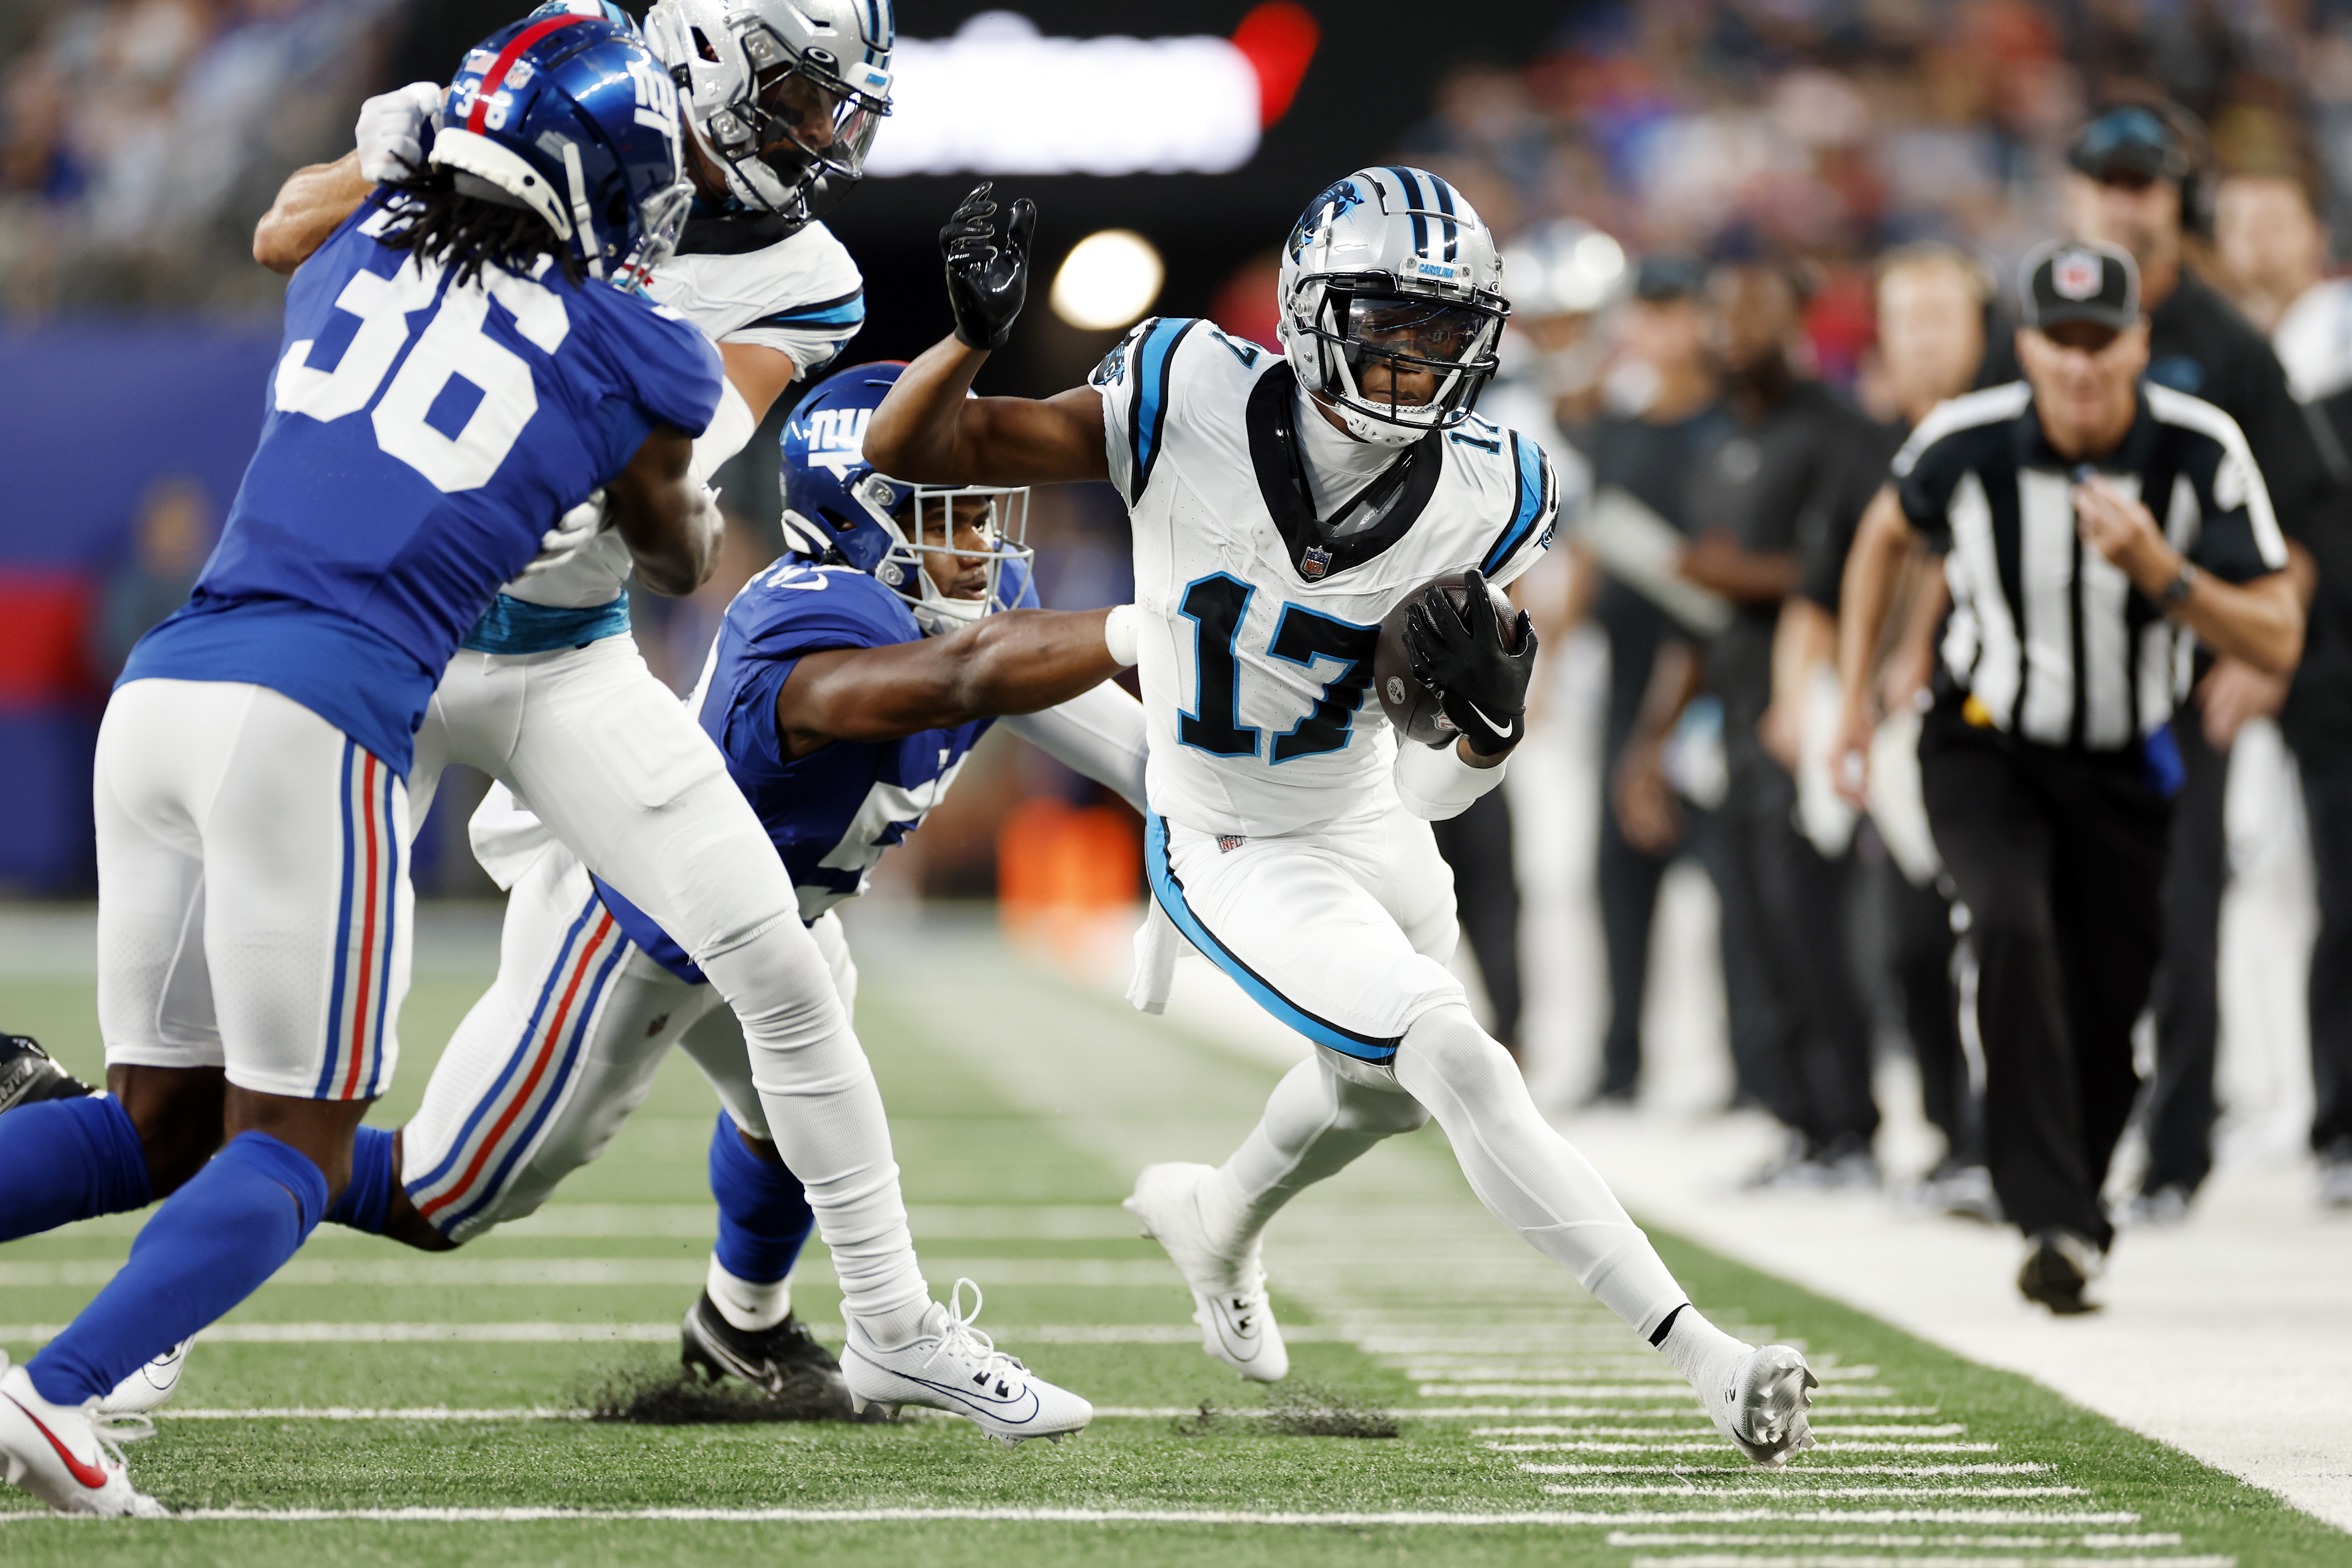 Jones plays like $40 million man for Giants, No 1 overall Young shows  flashes for Panthers